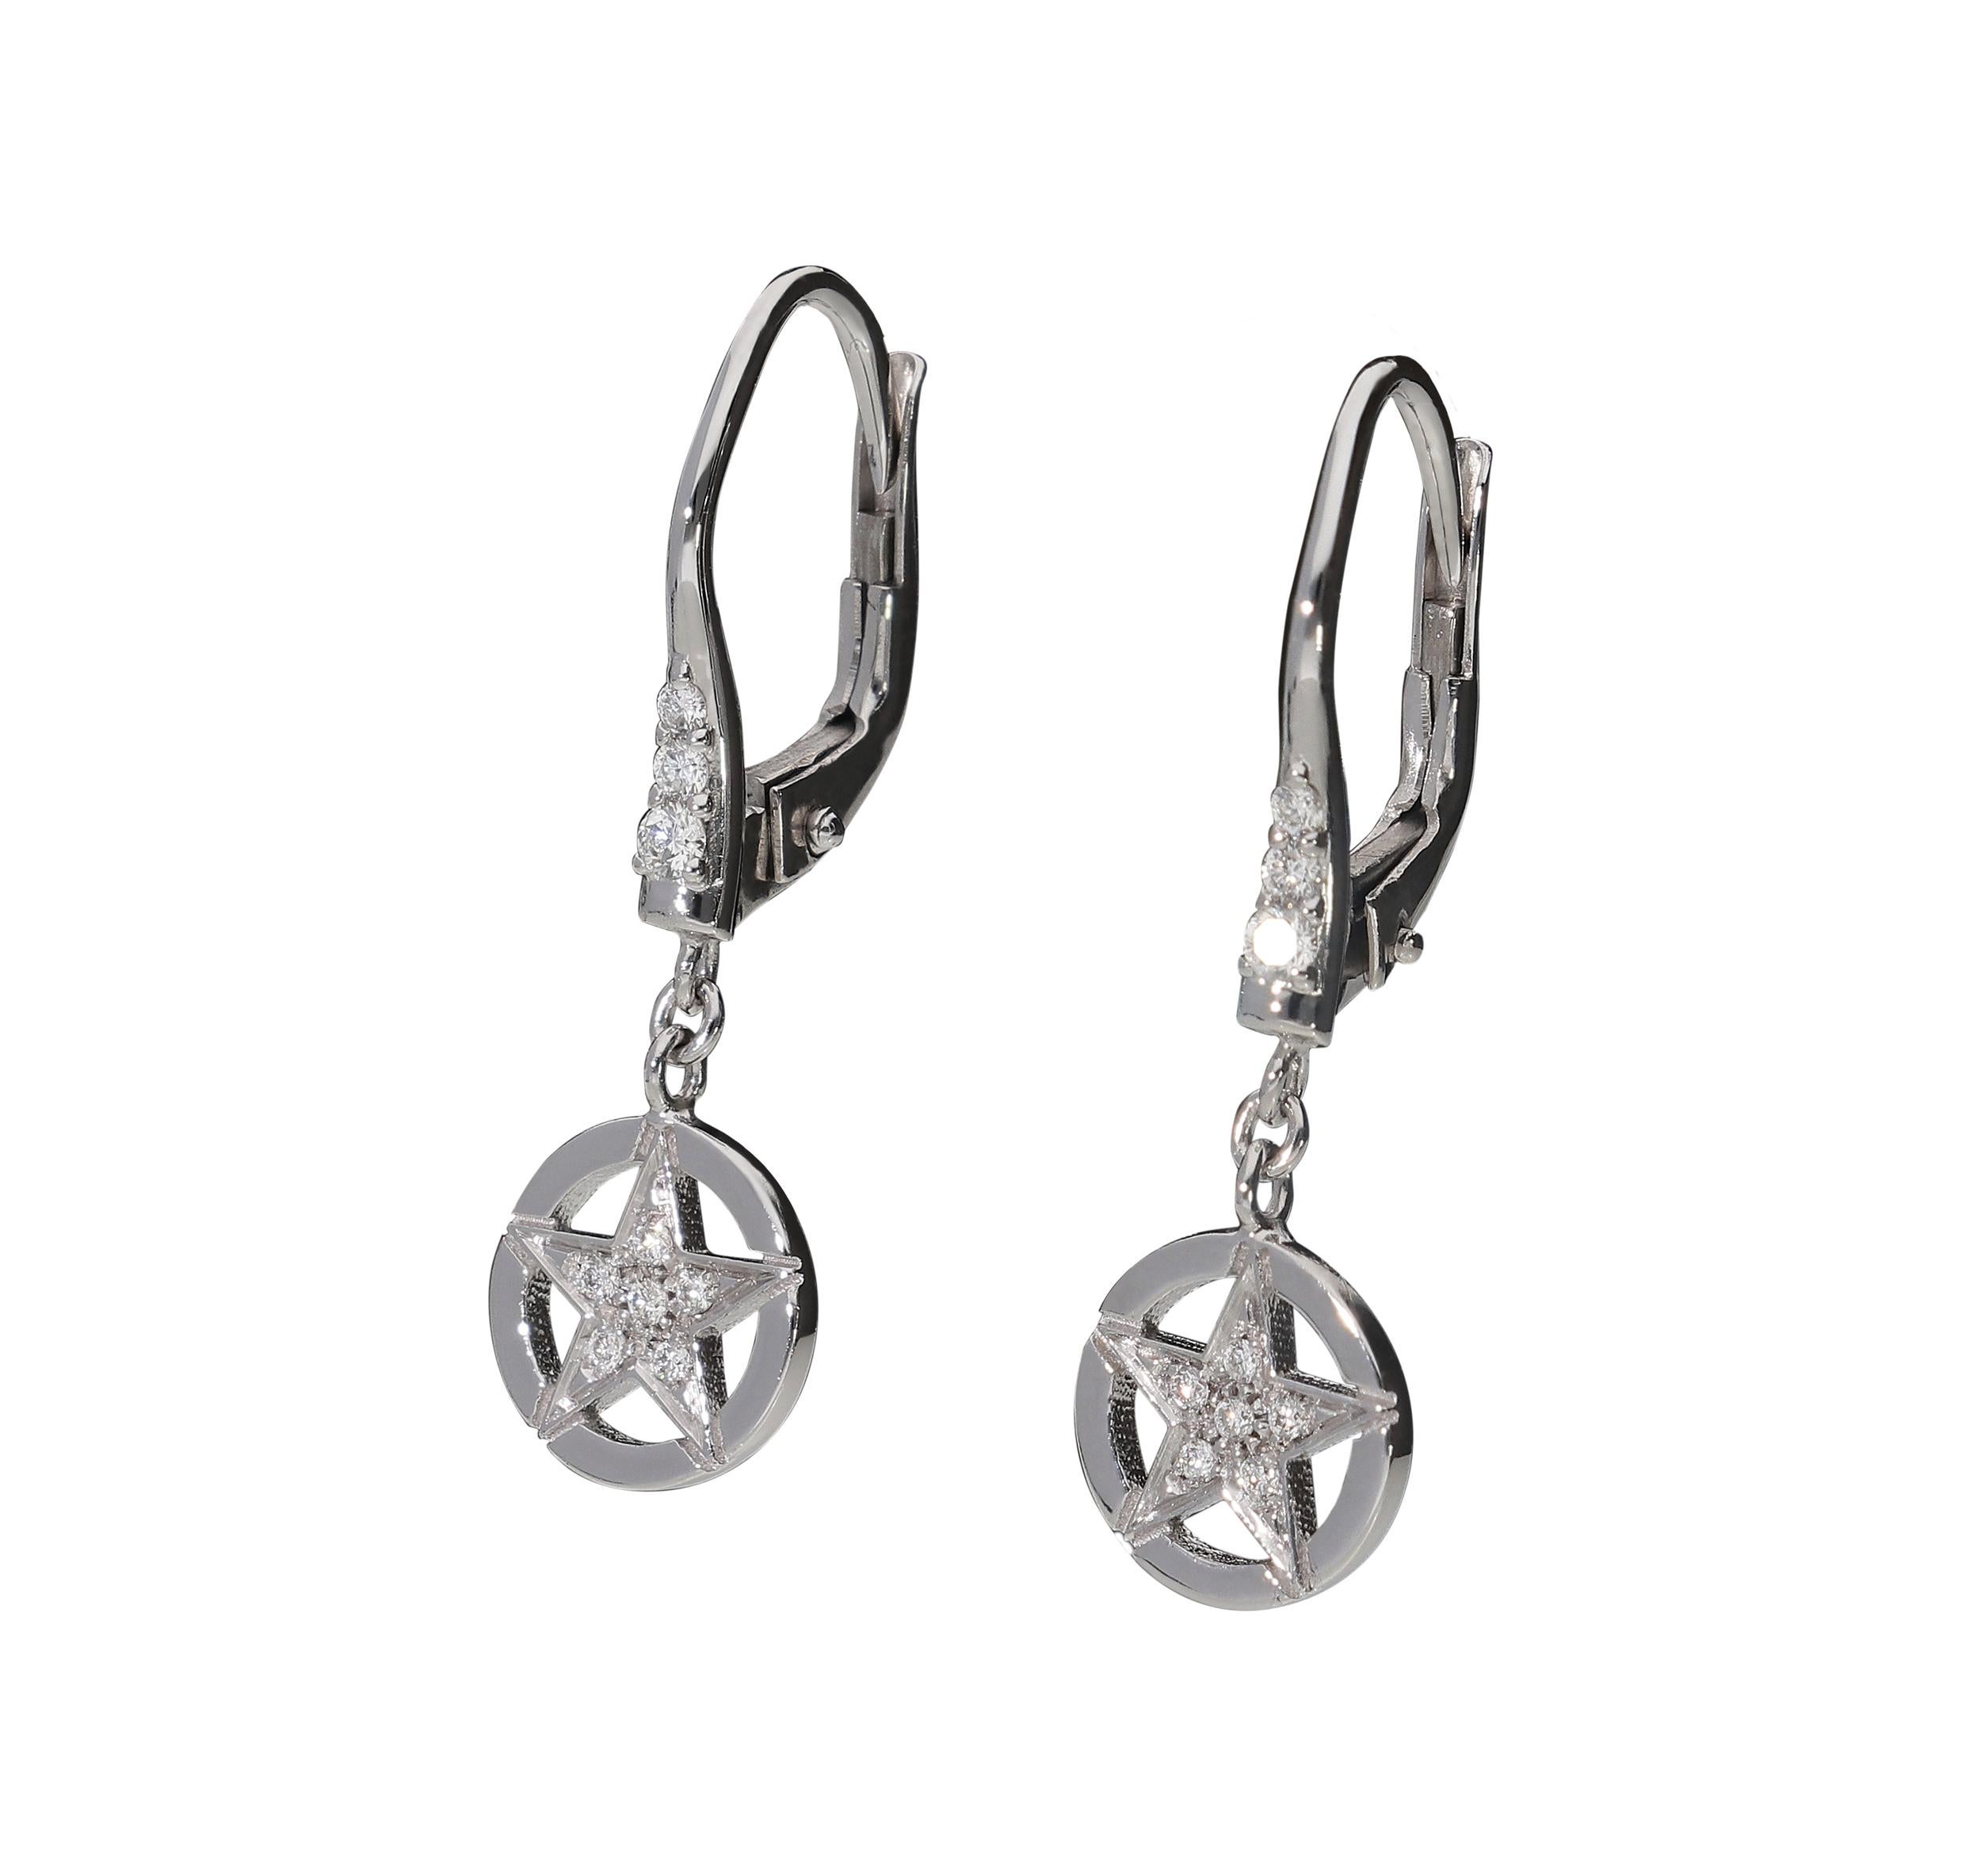 Dangle earrings in 18kt white gold for 3,10 grams and white round brilliant diamonds for 0,15 carat.
Their peculiarity is the star inside a circle, the total length is 2,70 centimeters and the width of the star is 0,85 centimeters.
A breath of fresh